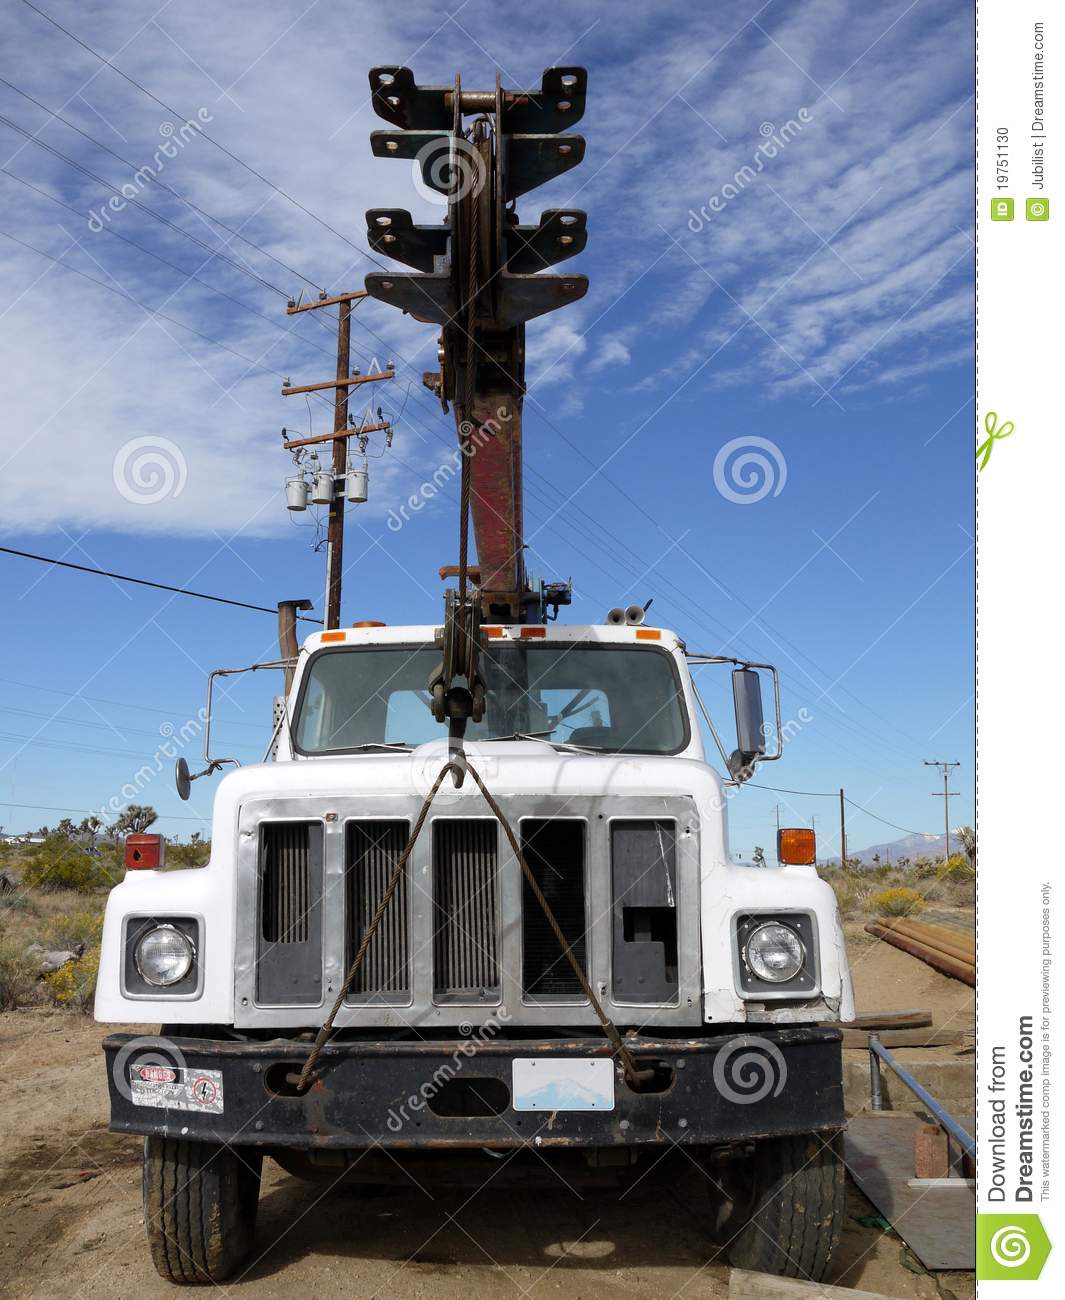 Well Drilling Truck  Front View Stock Photo   Image  19751130